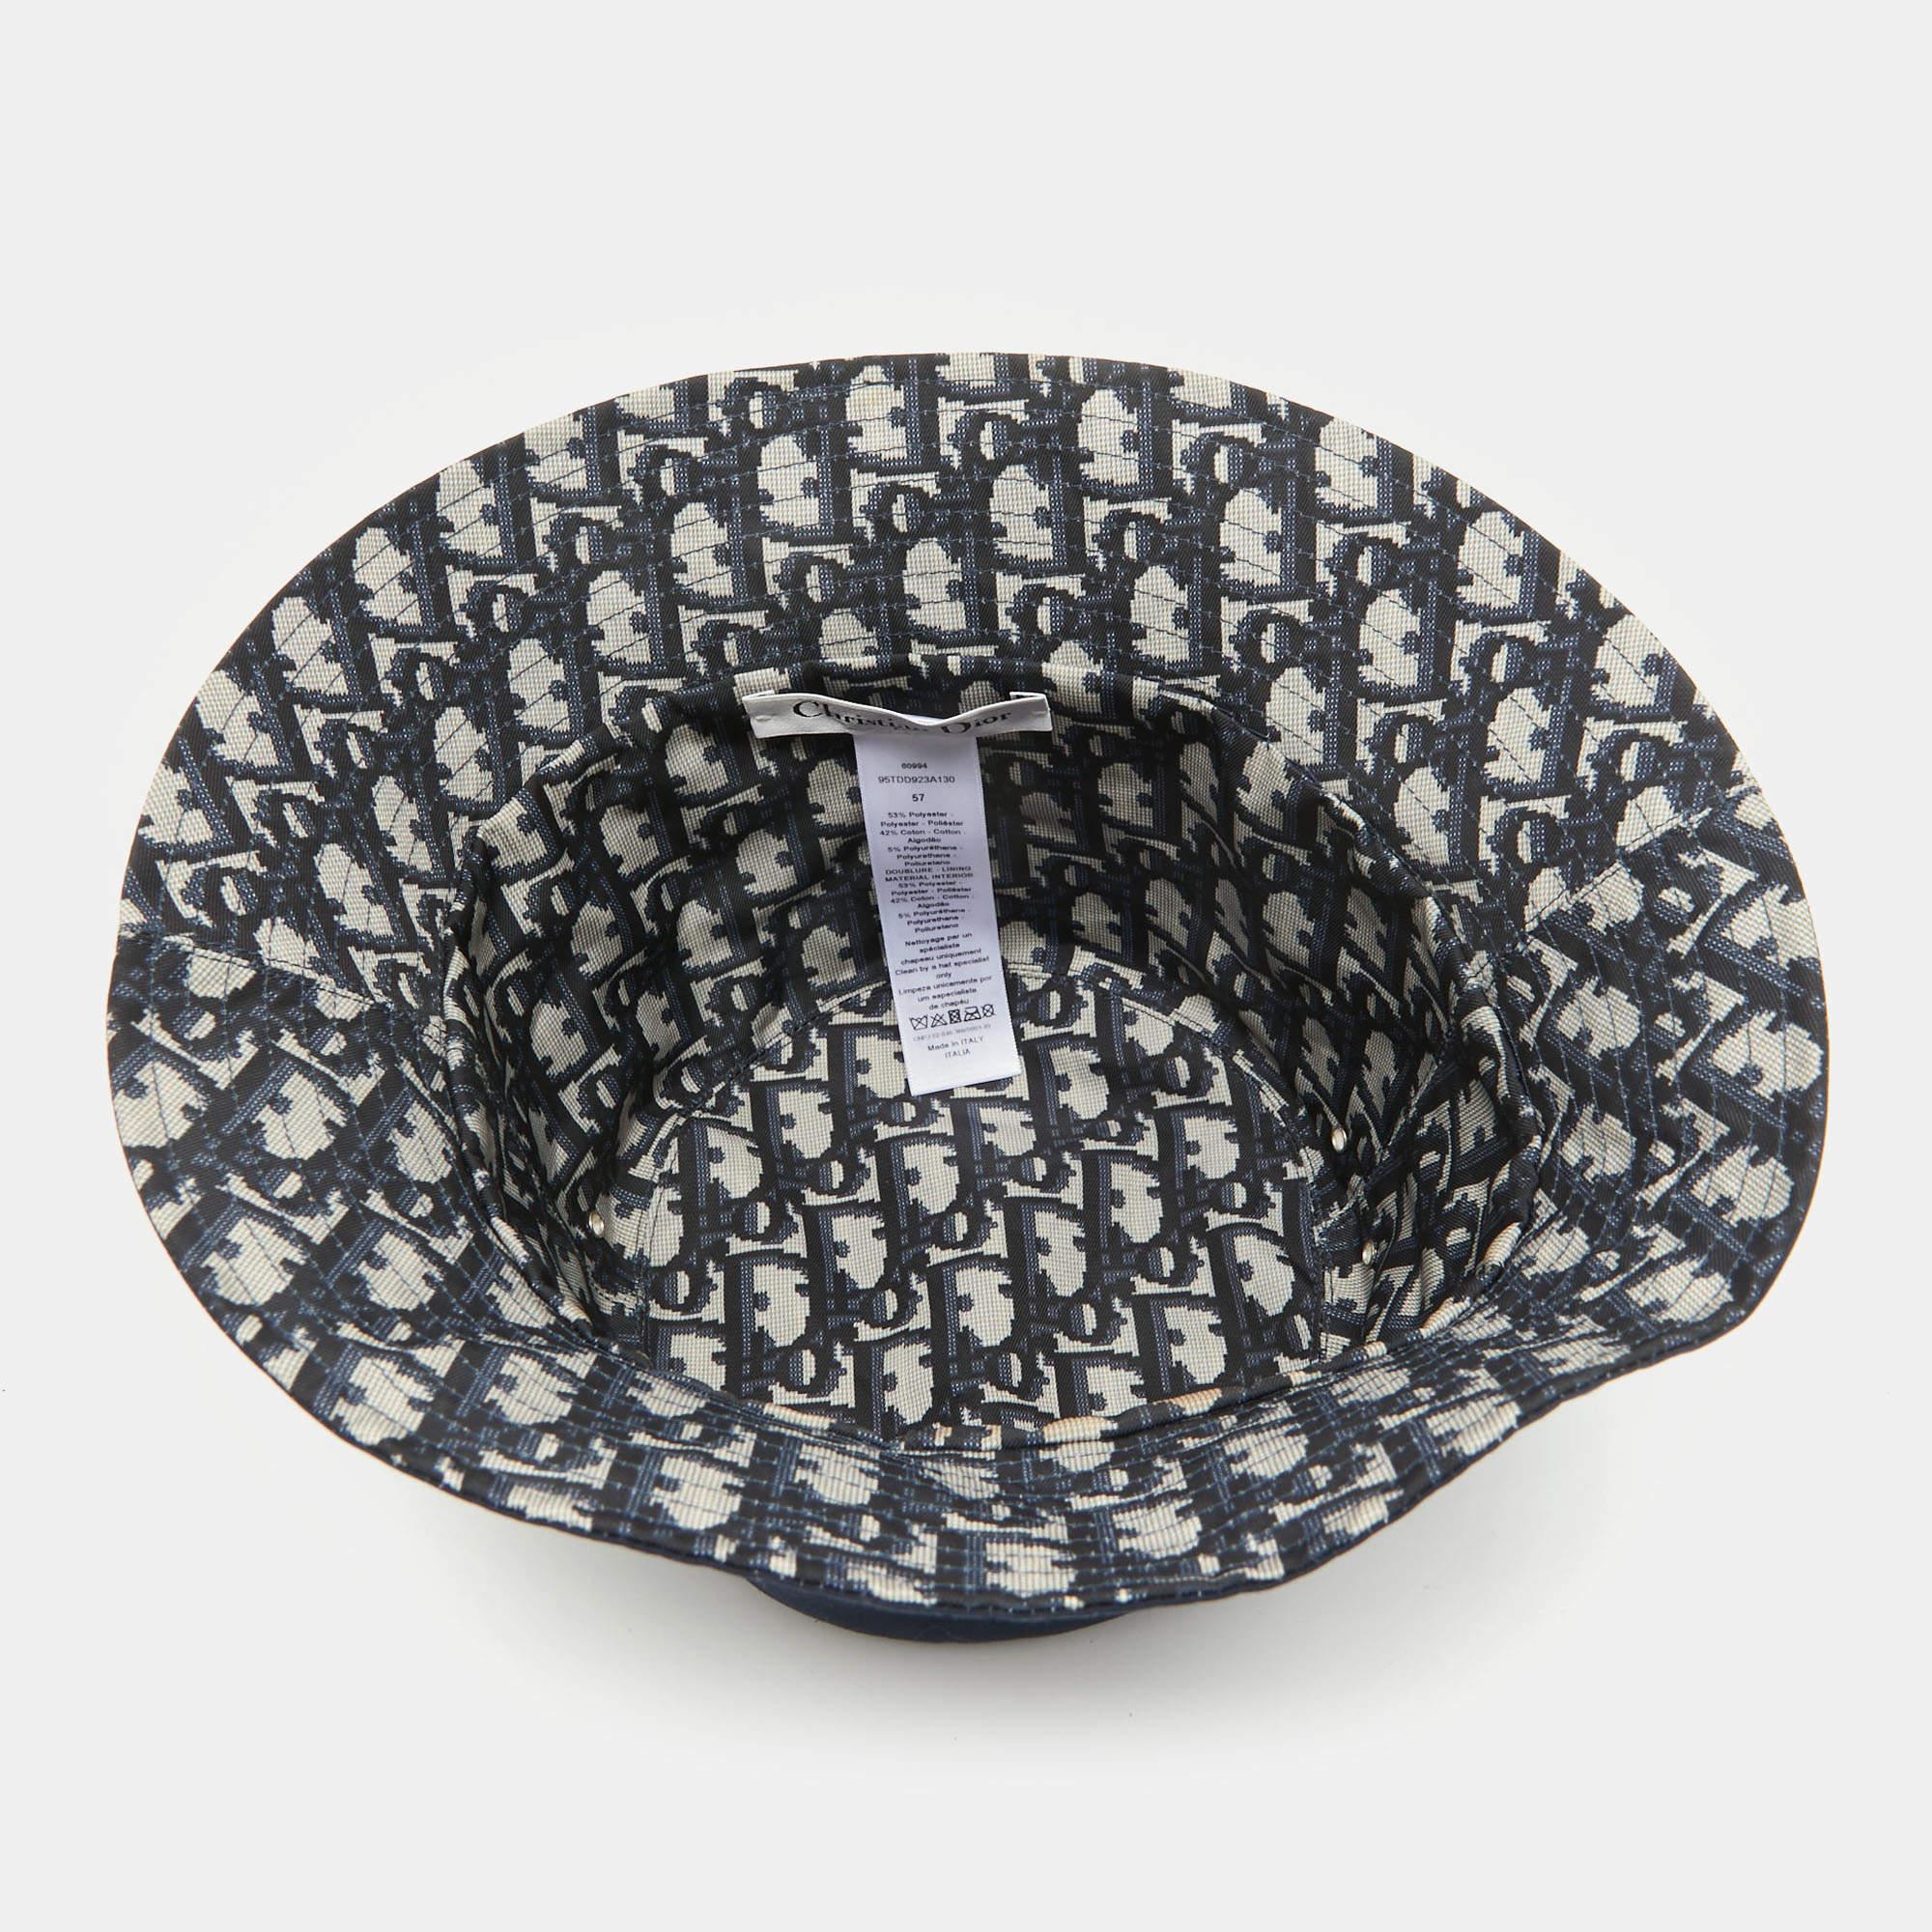 Head out looking chic with this bucket hat from the House of Dior. It has been made using cotton blend fabric and has the Oblique motif on the inside.

